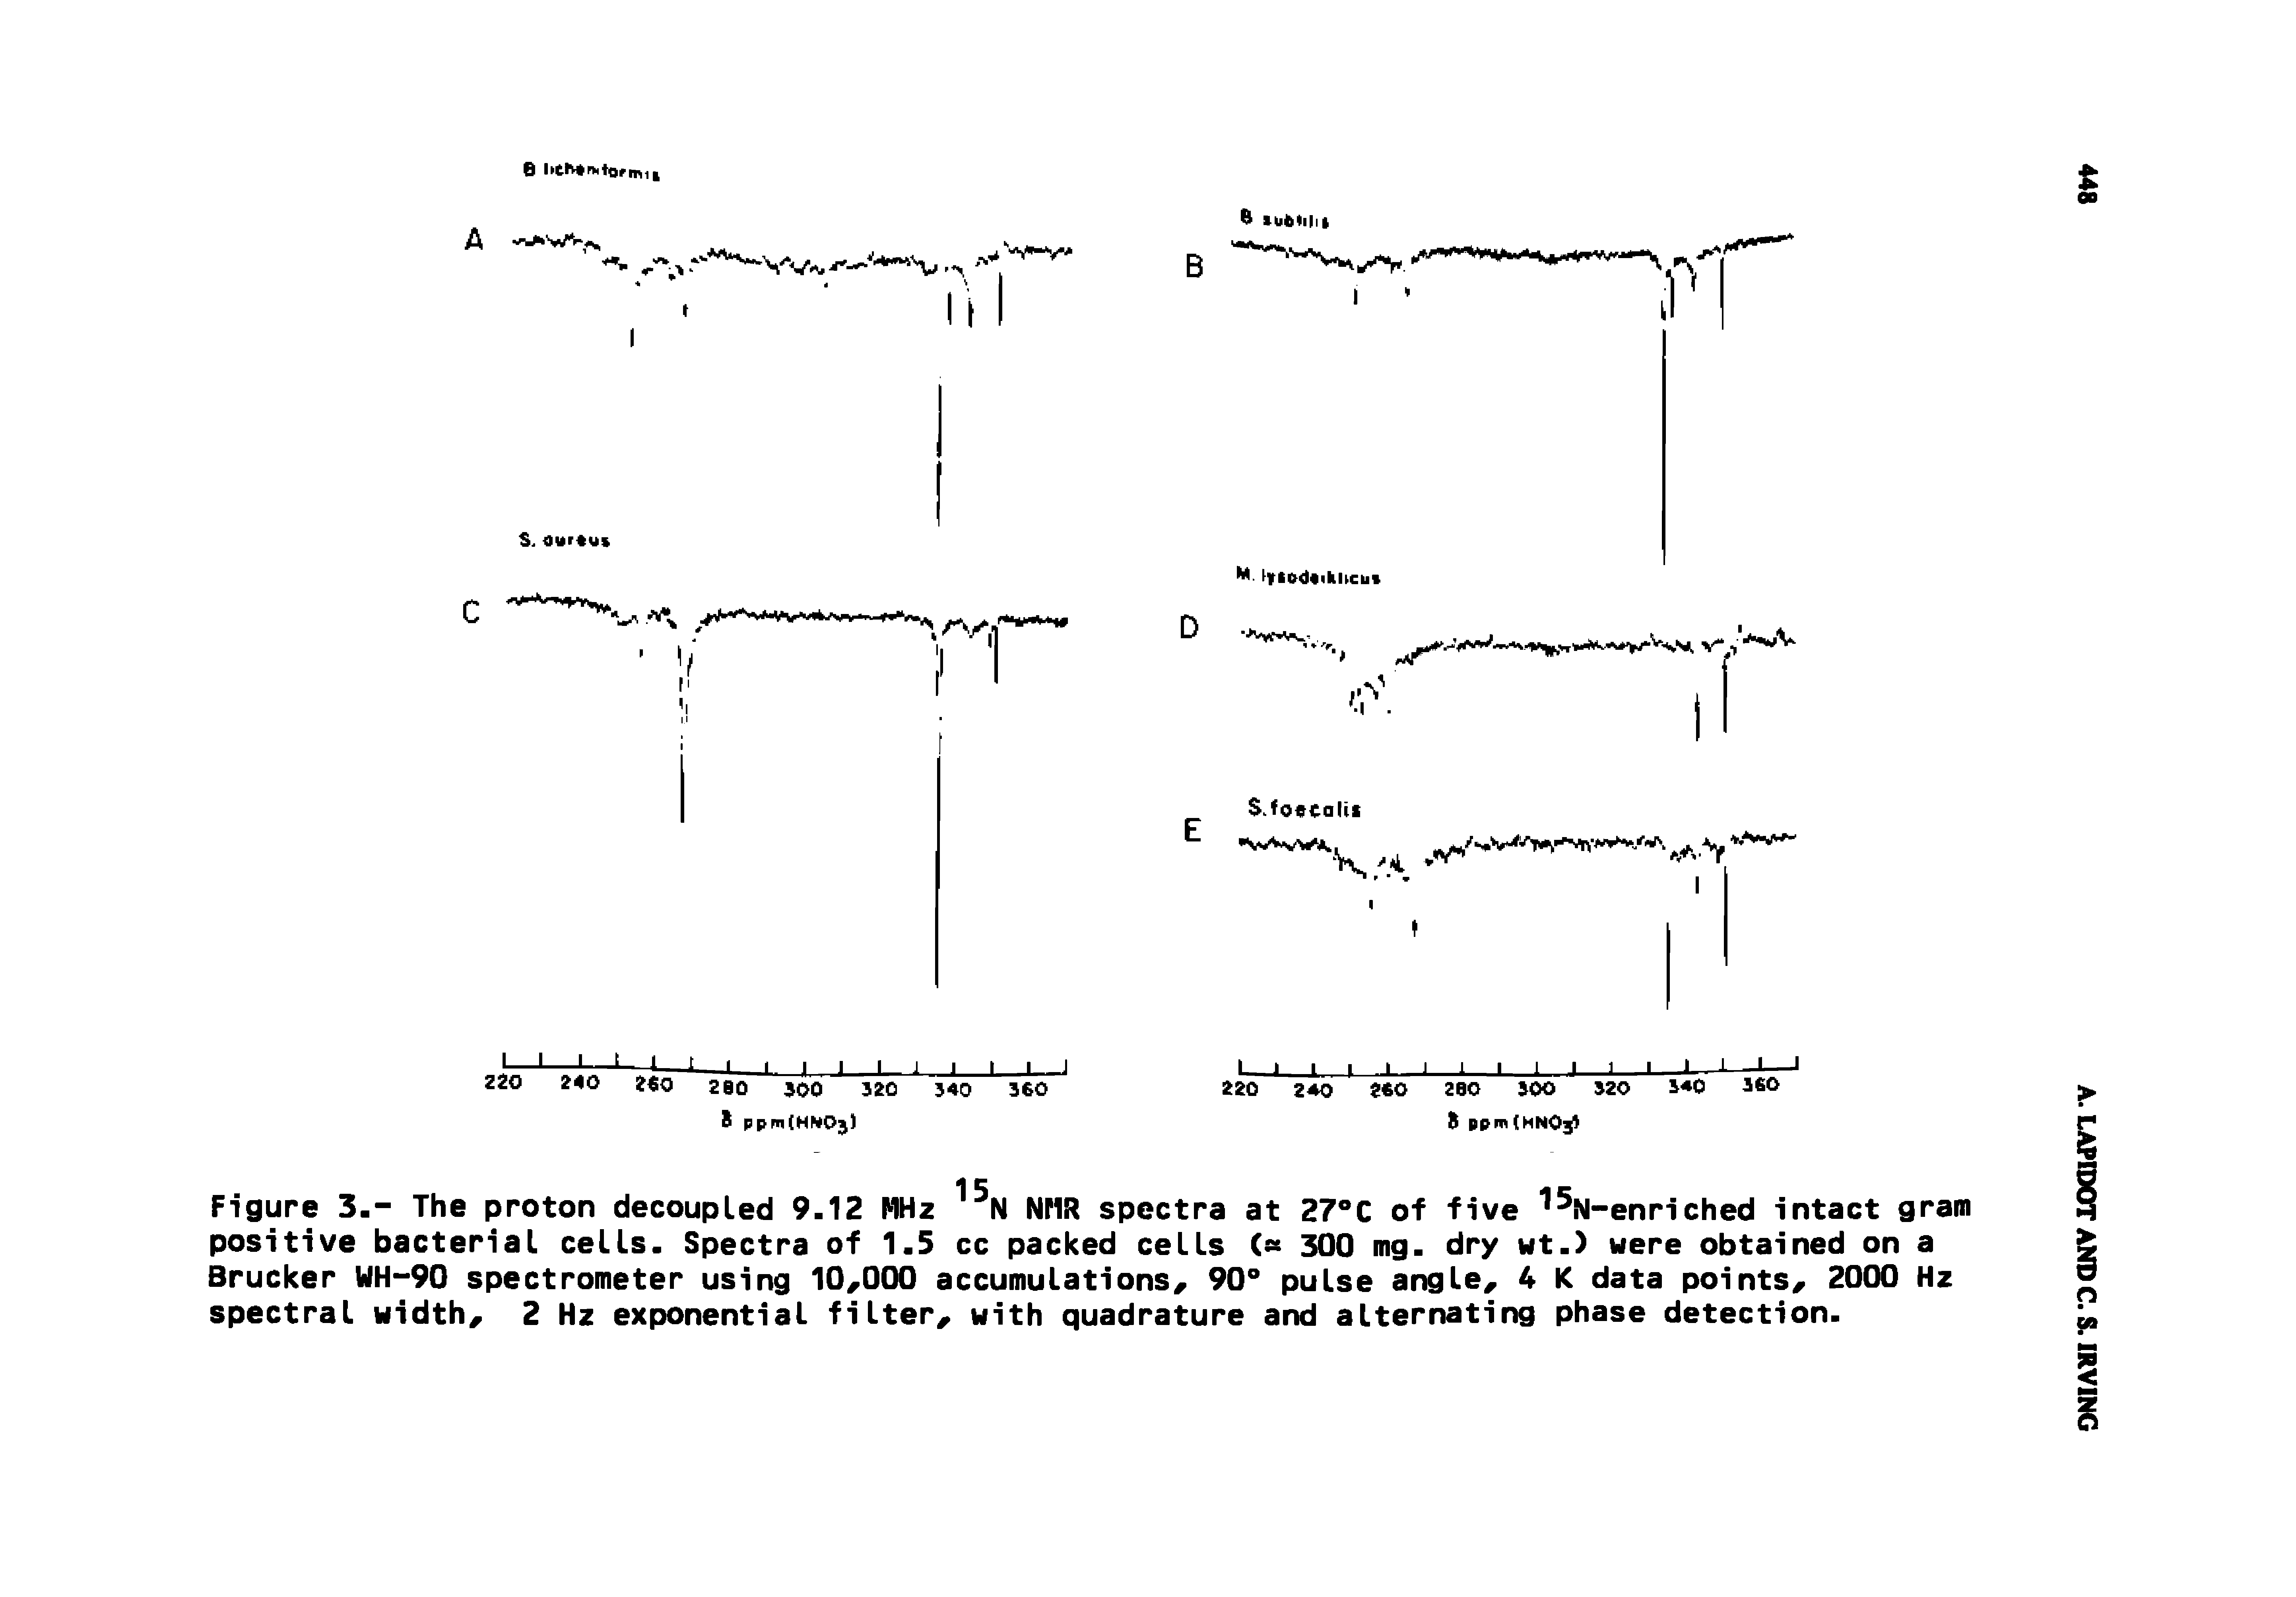 Figure 3.- The proton decoupled 9.12 MHz NMR spectra at 27 C of five ISig-enriched intact gram positive bacterial cells. Spectra of 1.5 cc packed cells ( 300 mg. dry wt.) were obtained on a Brucker UH-90 spectrometer using 10,000 accumulations, 90° pulse angle, 4 K data points, 2000 Hz spectral width, 2 Hz exponential filter, with quadrature and alternating phase detection.